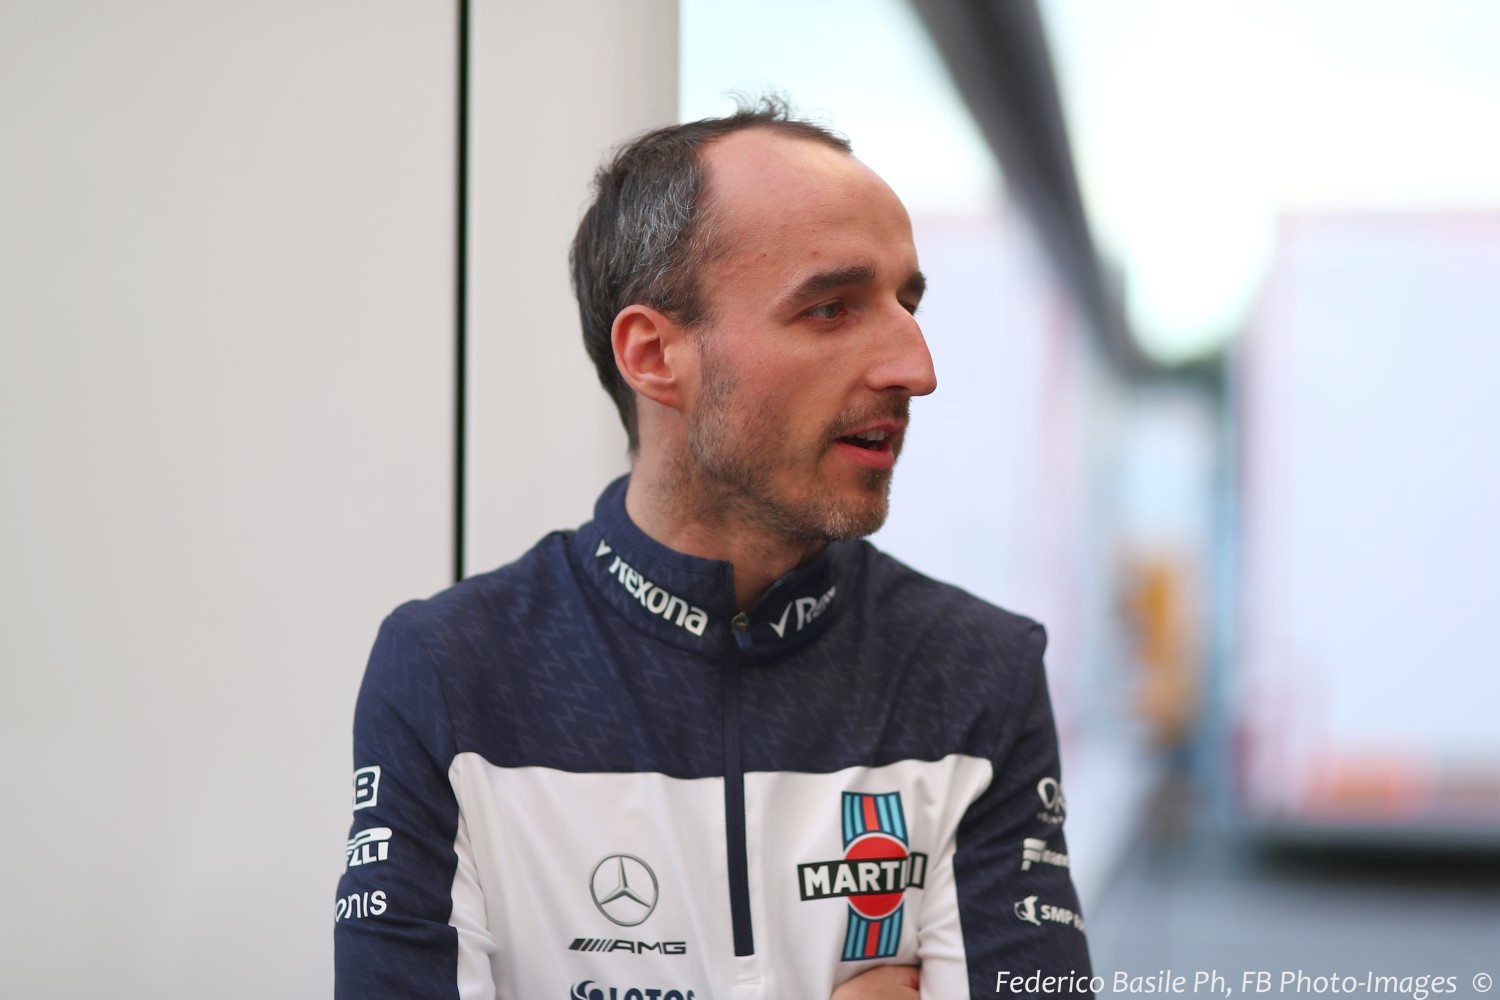 A sickly looking Kubica lost so much weight just to be competitive. Now has check, will drive.